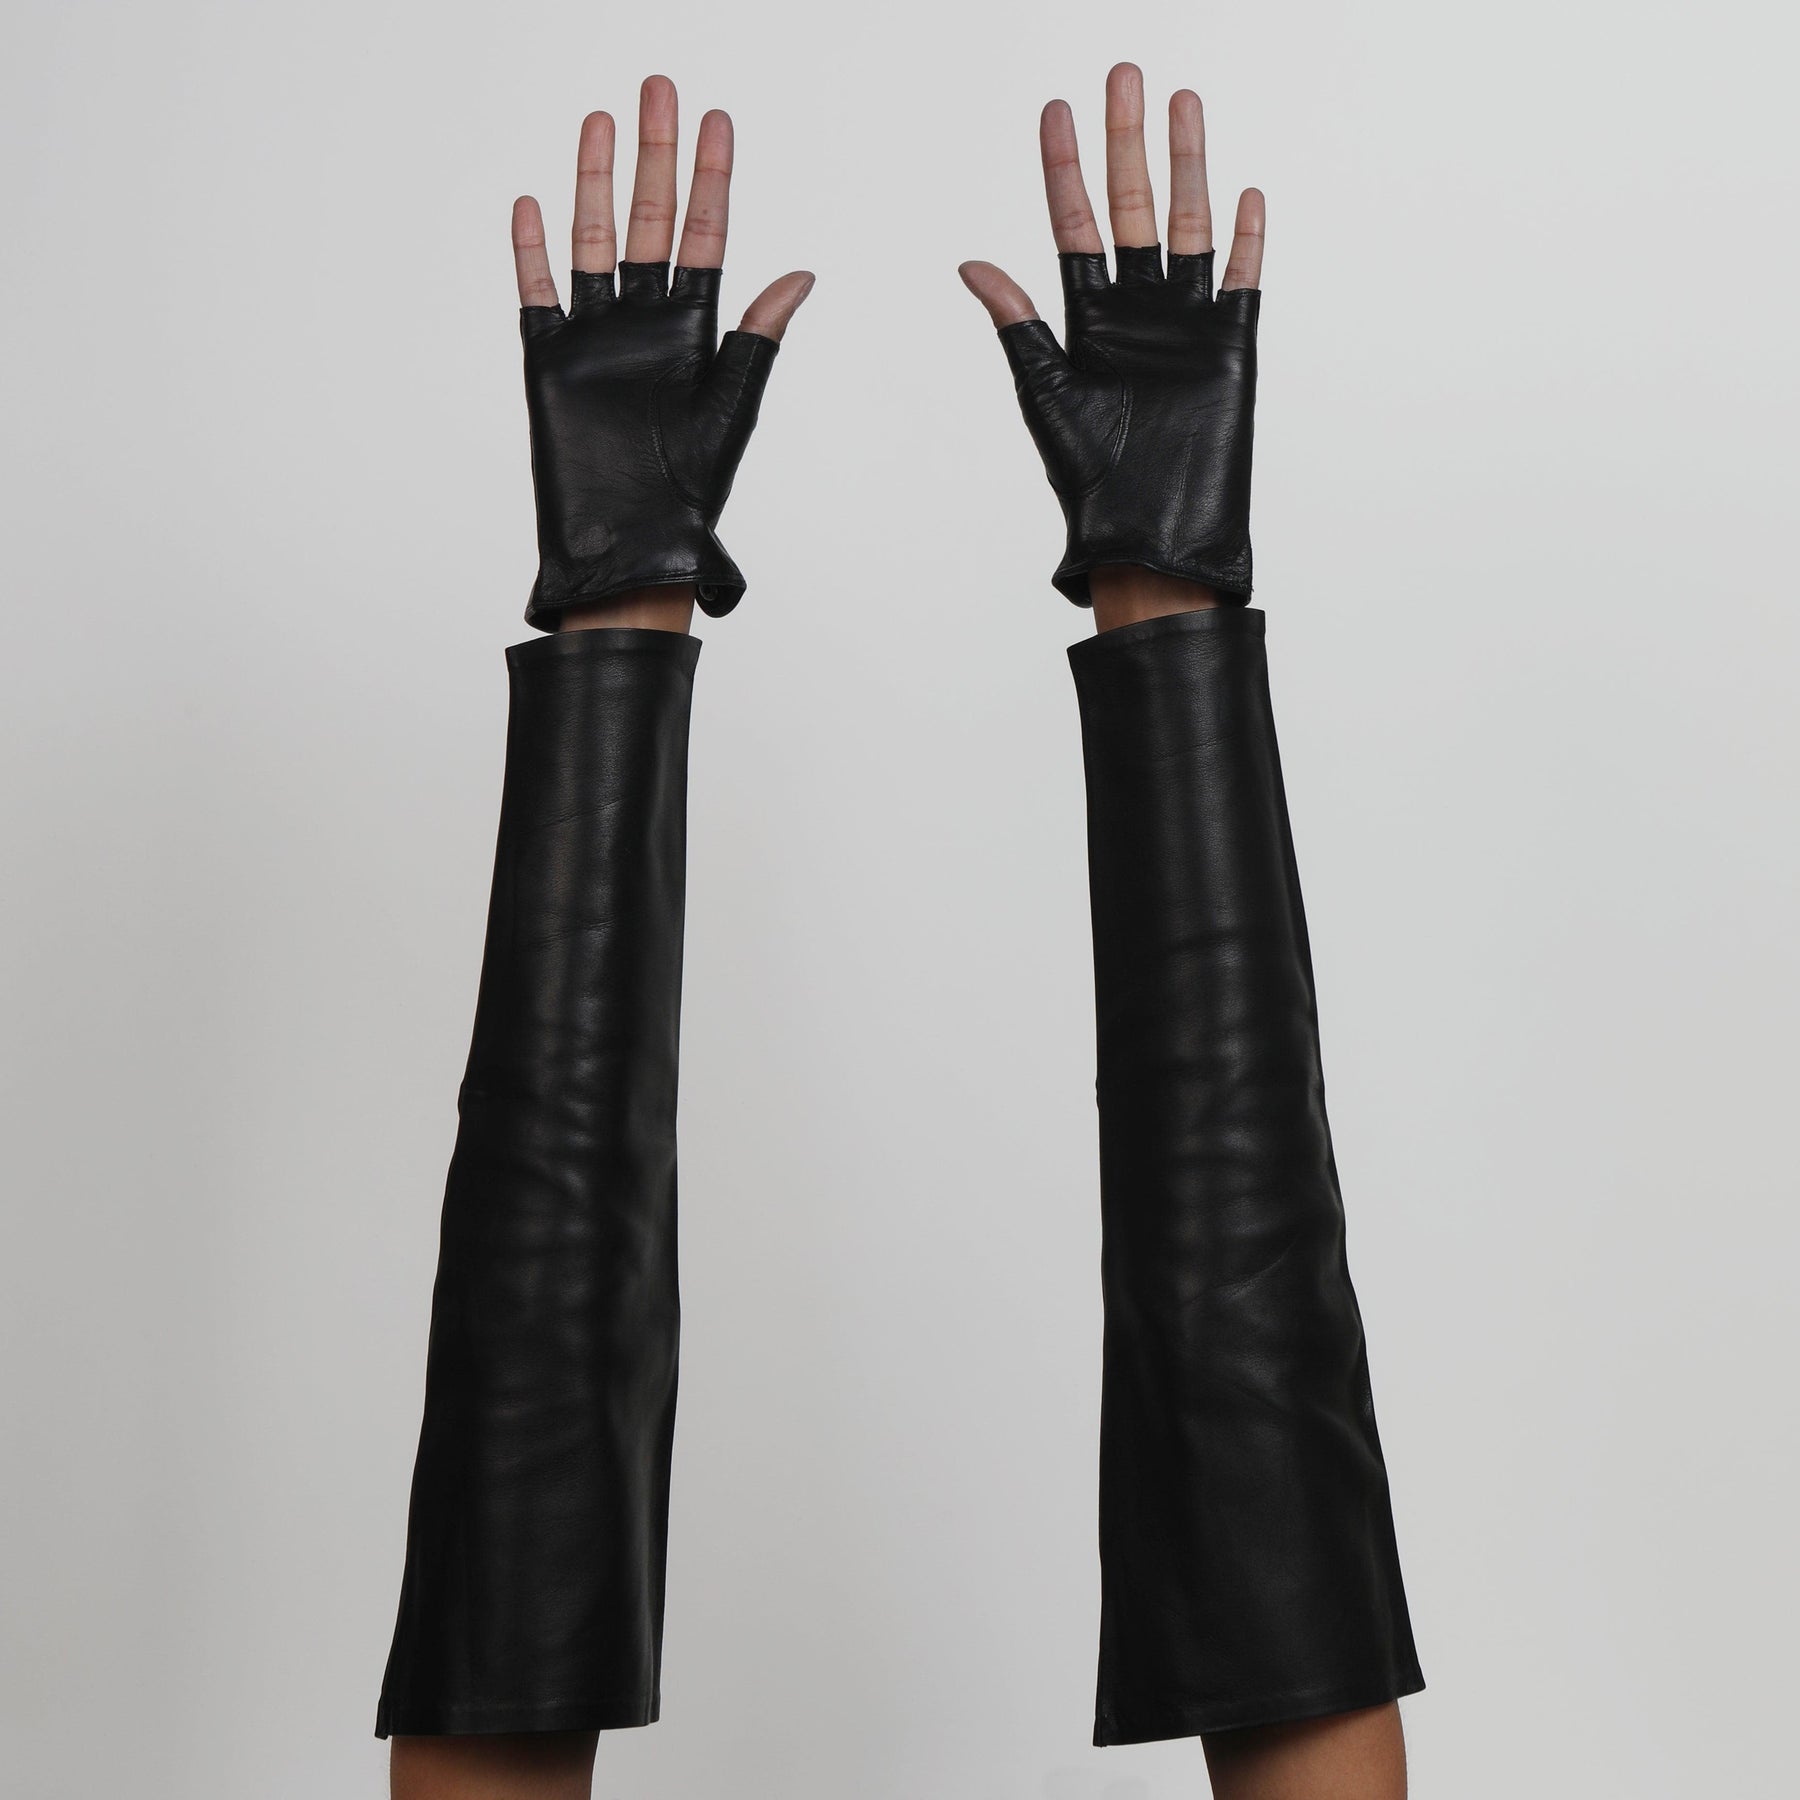 Love your look combo by Seymoure Gloves. Loveyourlook. Black Opera Gloves.